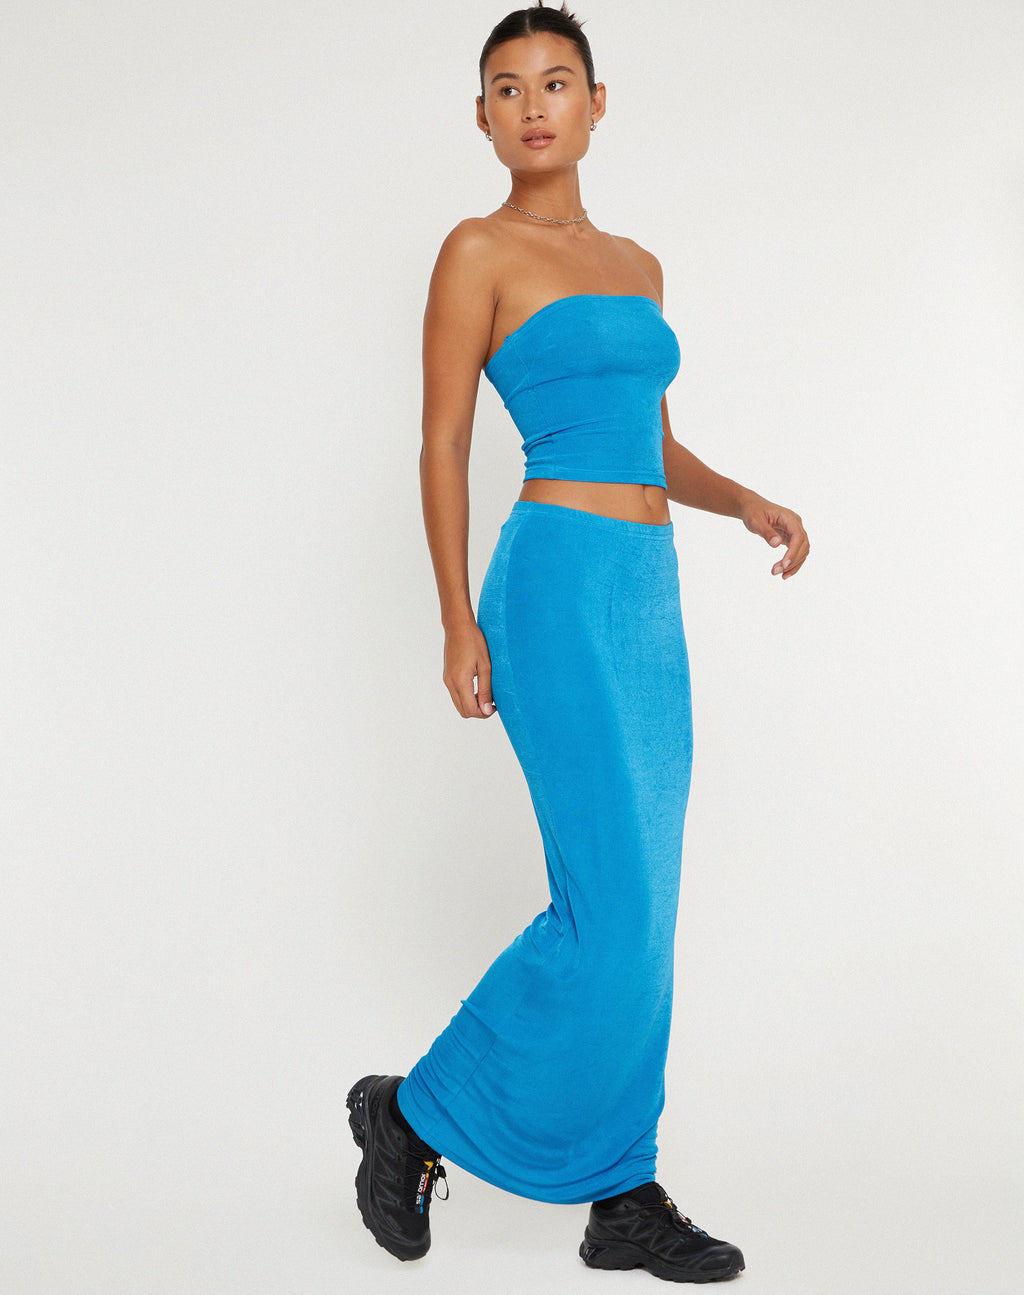 New Tulus Flood Maxi Skirt in Electric Blue